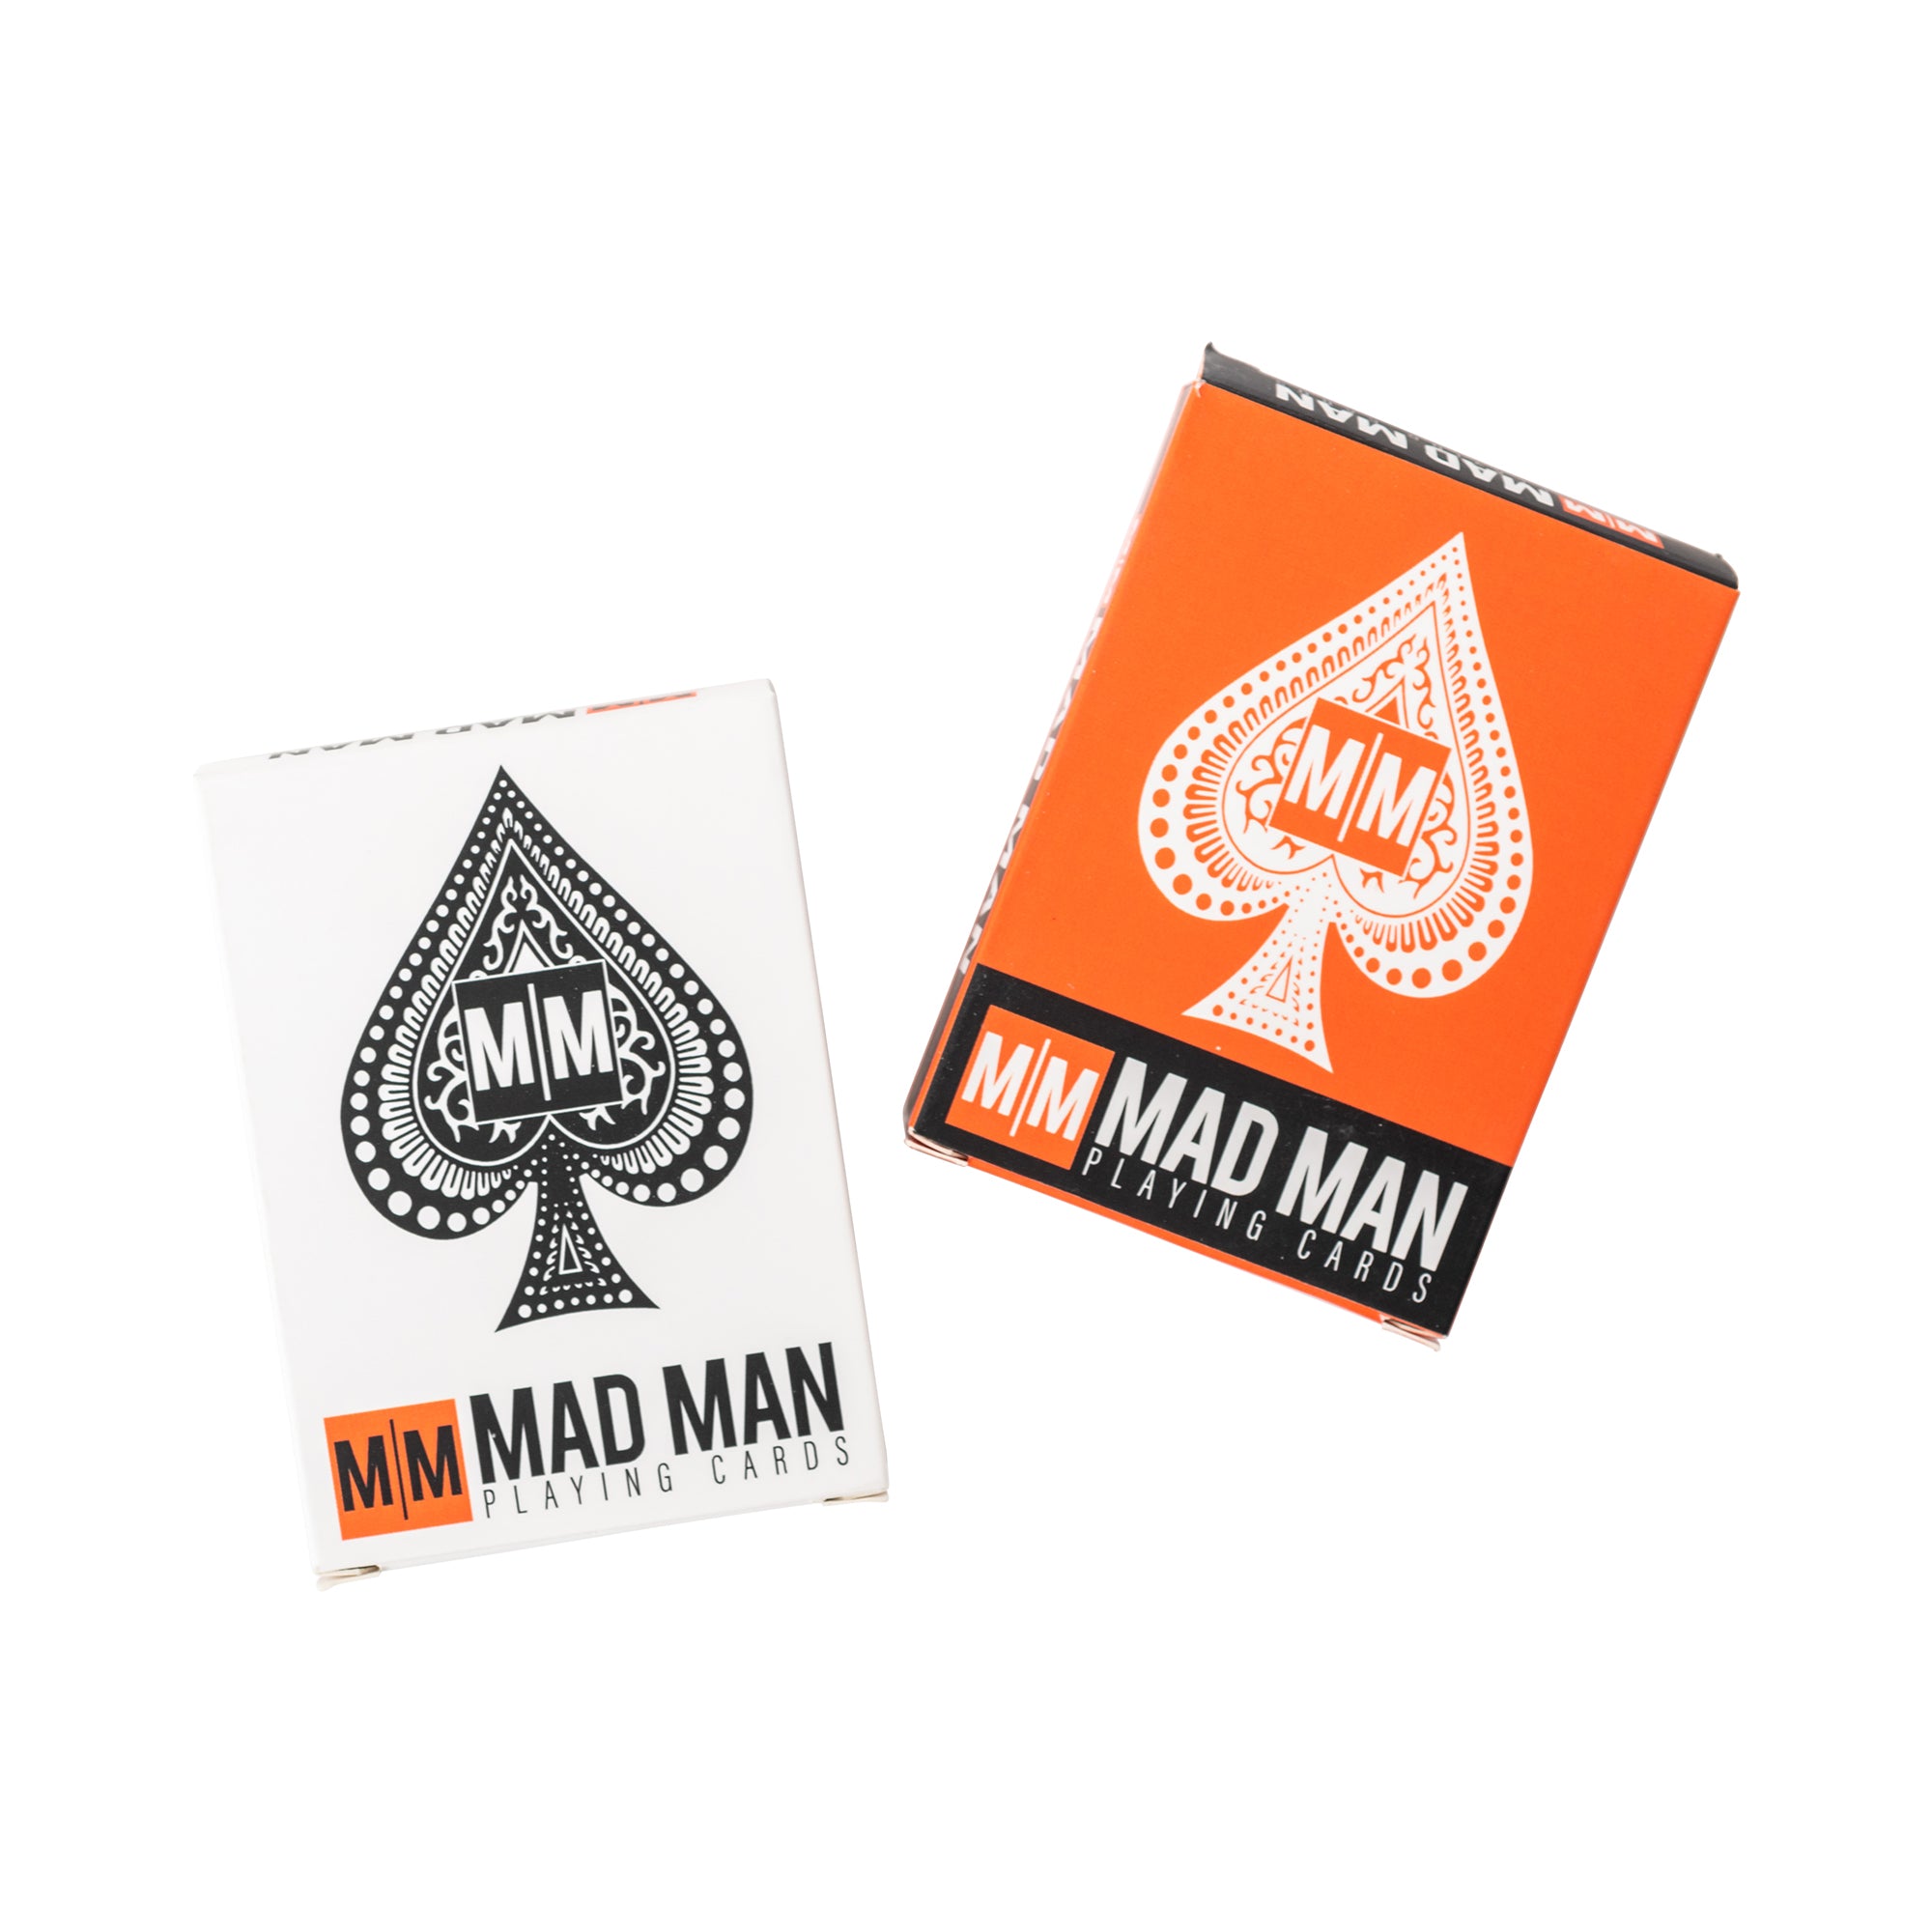 Mad Man Playing Cards Pre-Loaded Display (12 pcs)